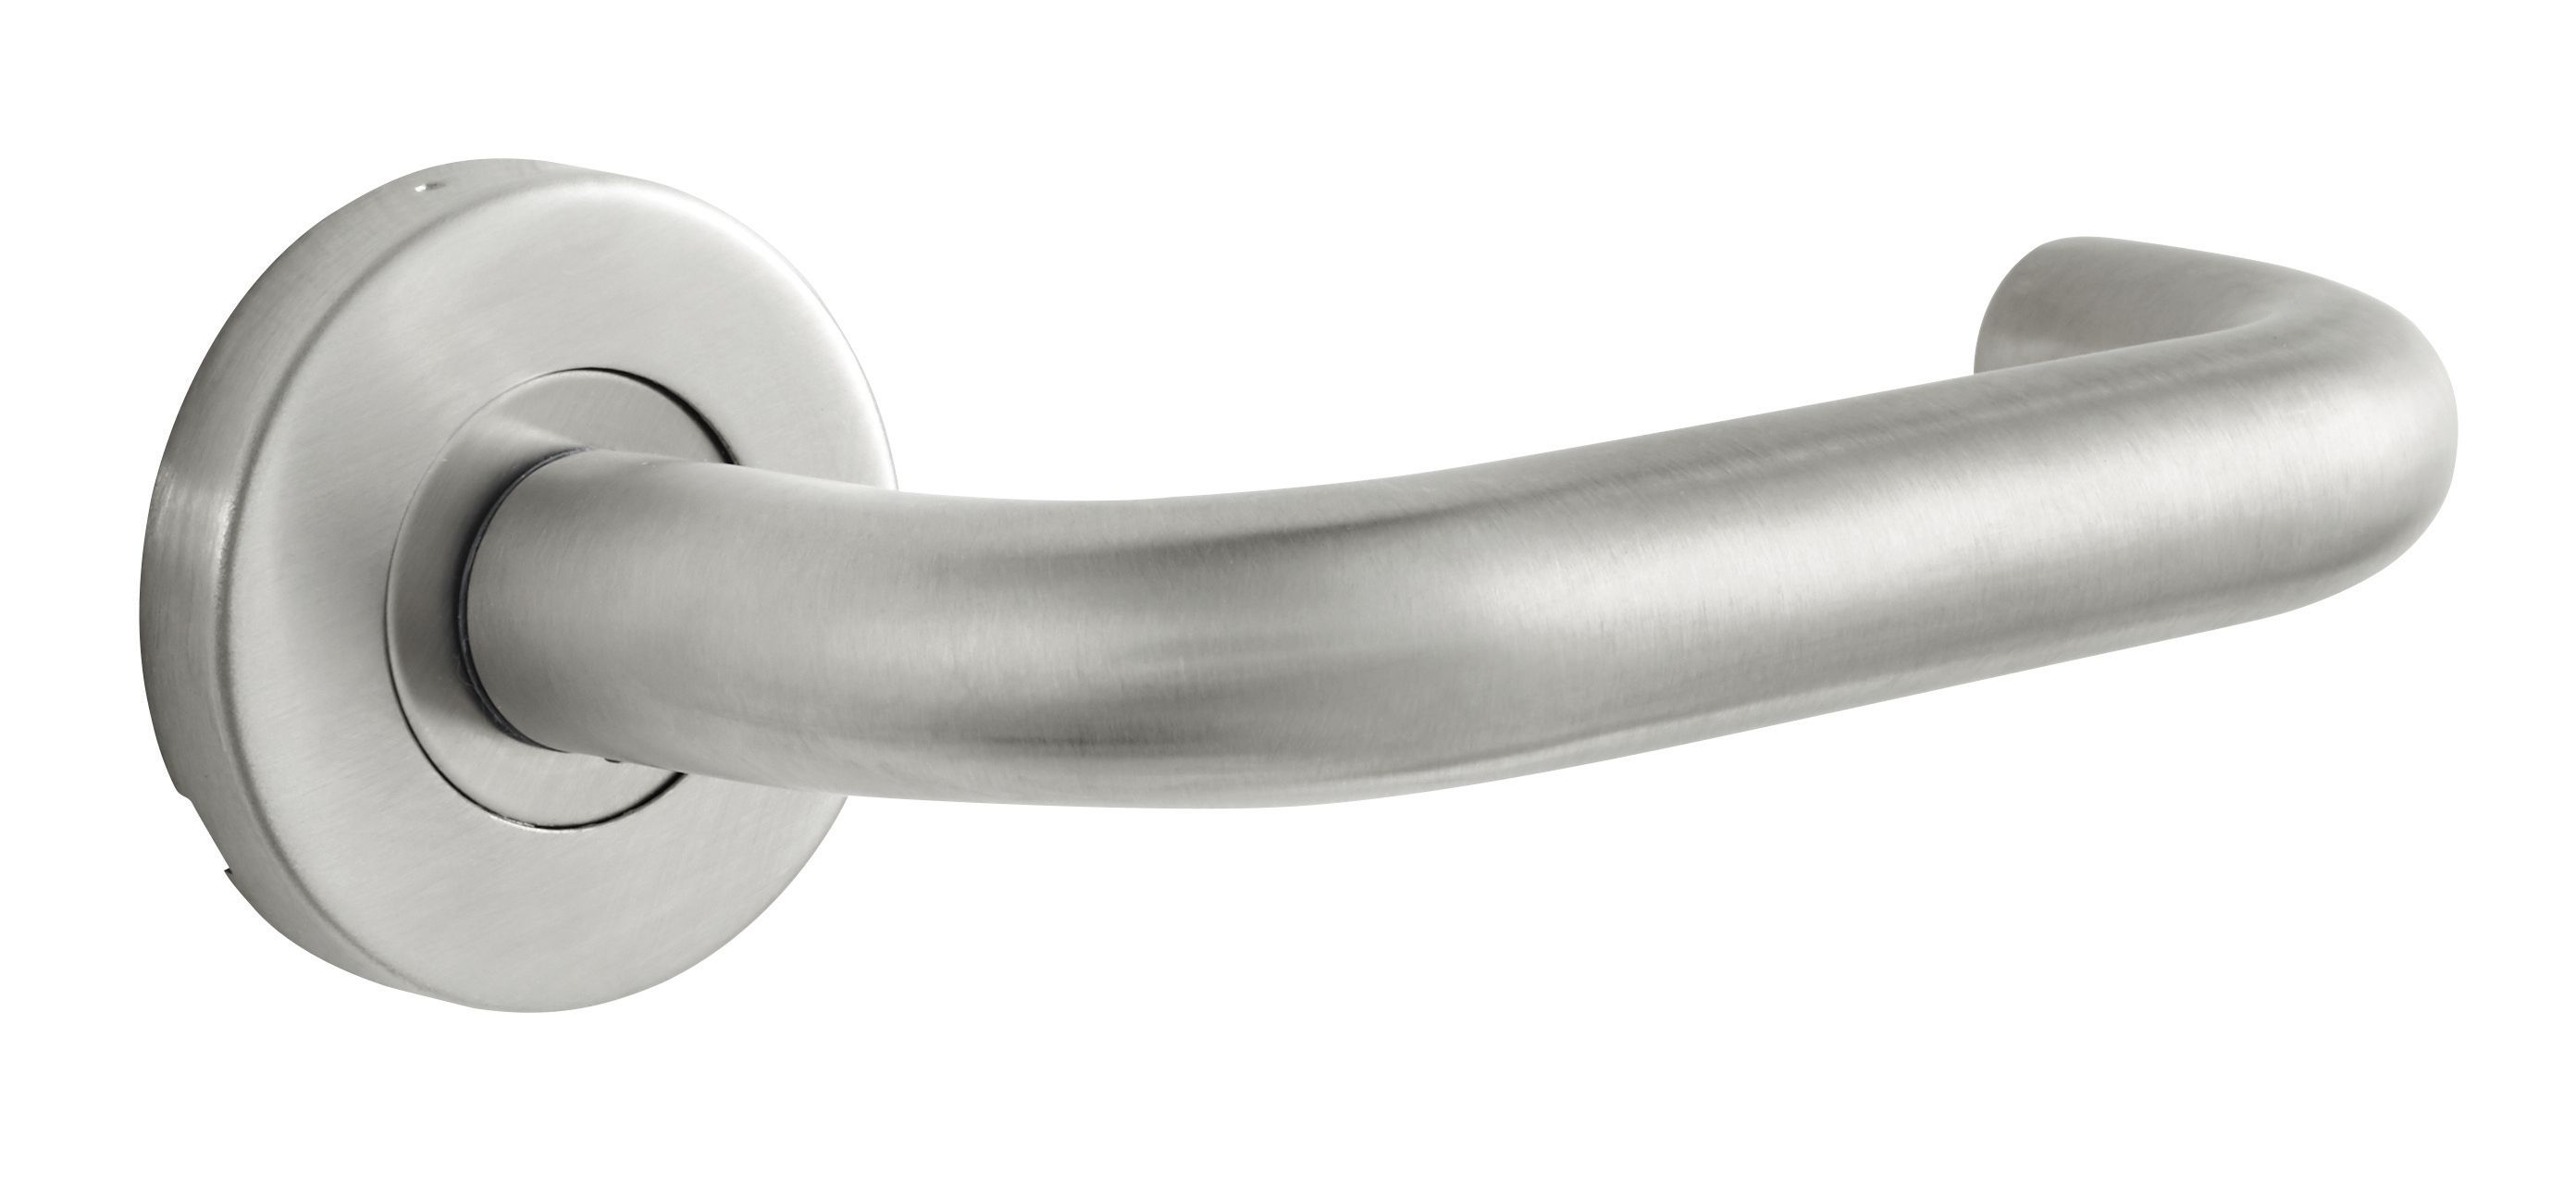 Designer Levers Athena Lever On Rose Door Handle - Brushed Stainless Steel 1 Pair